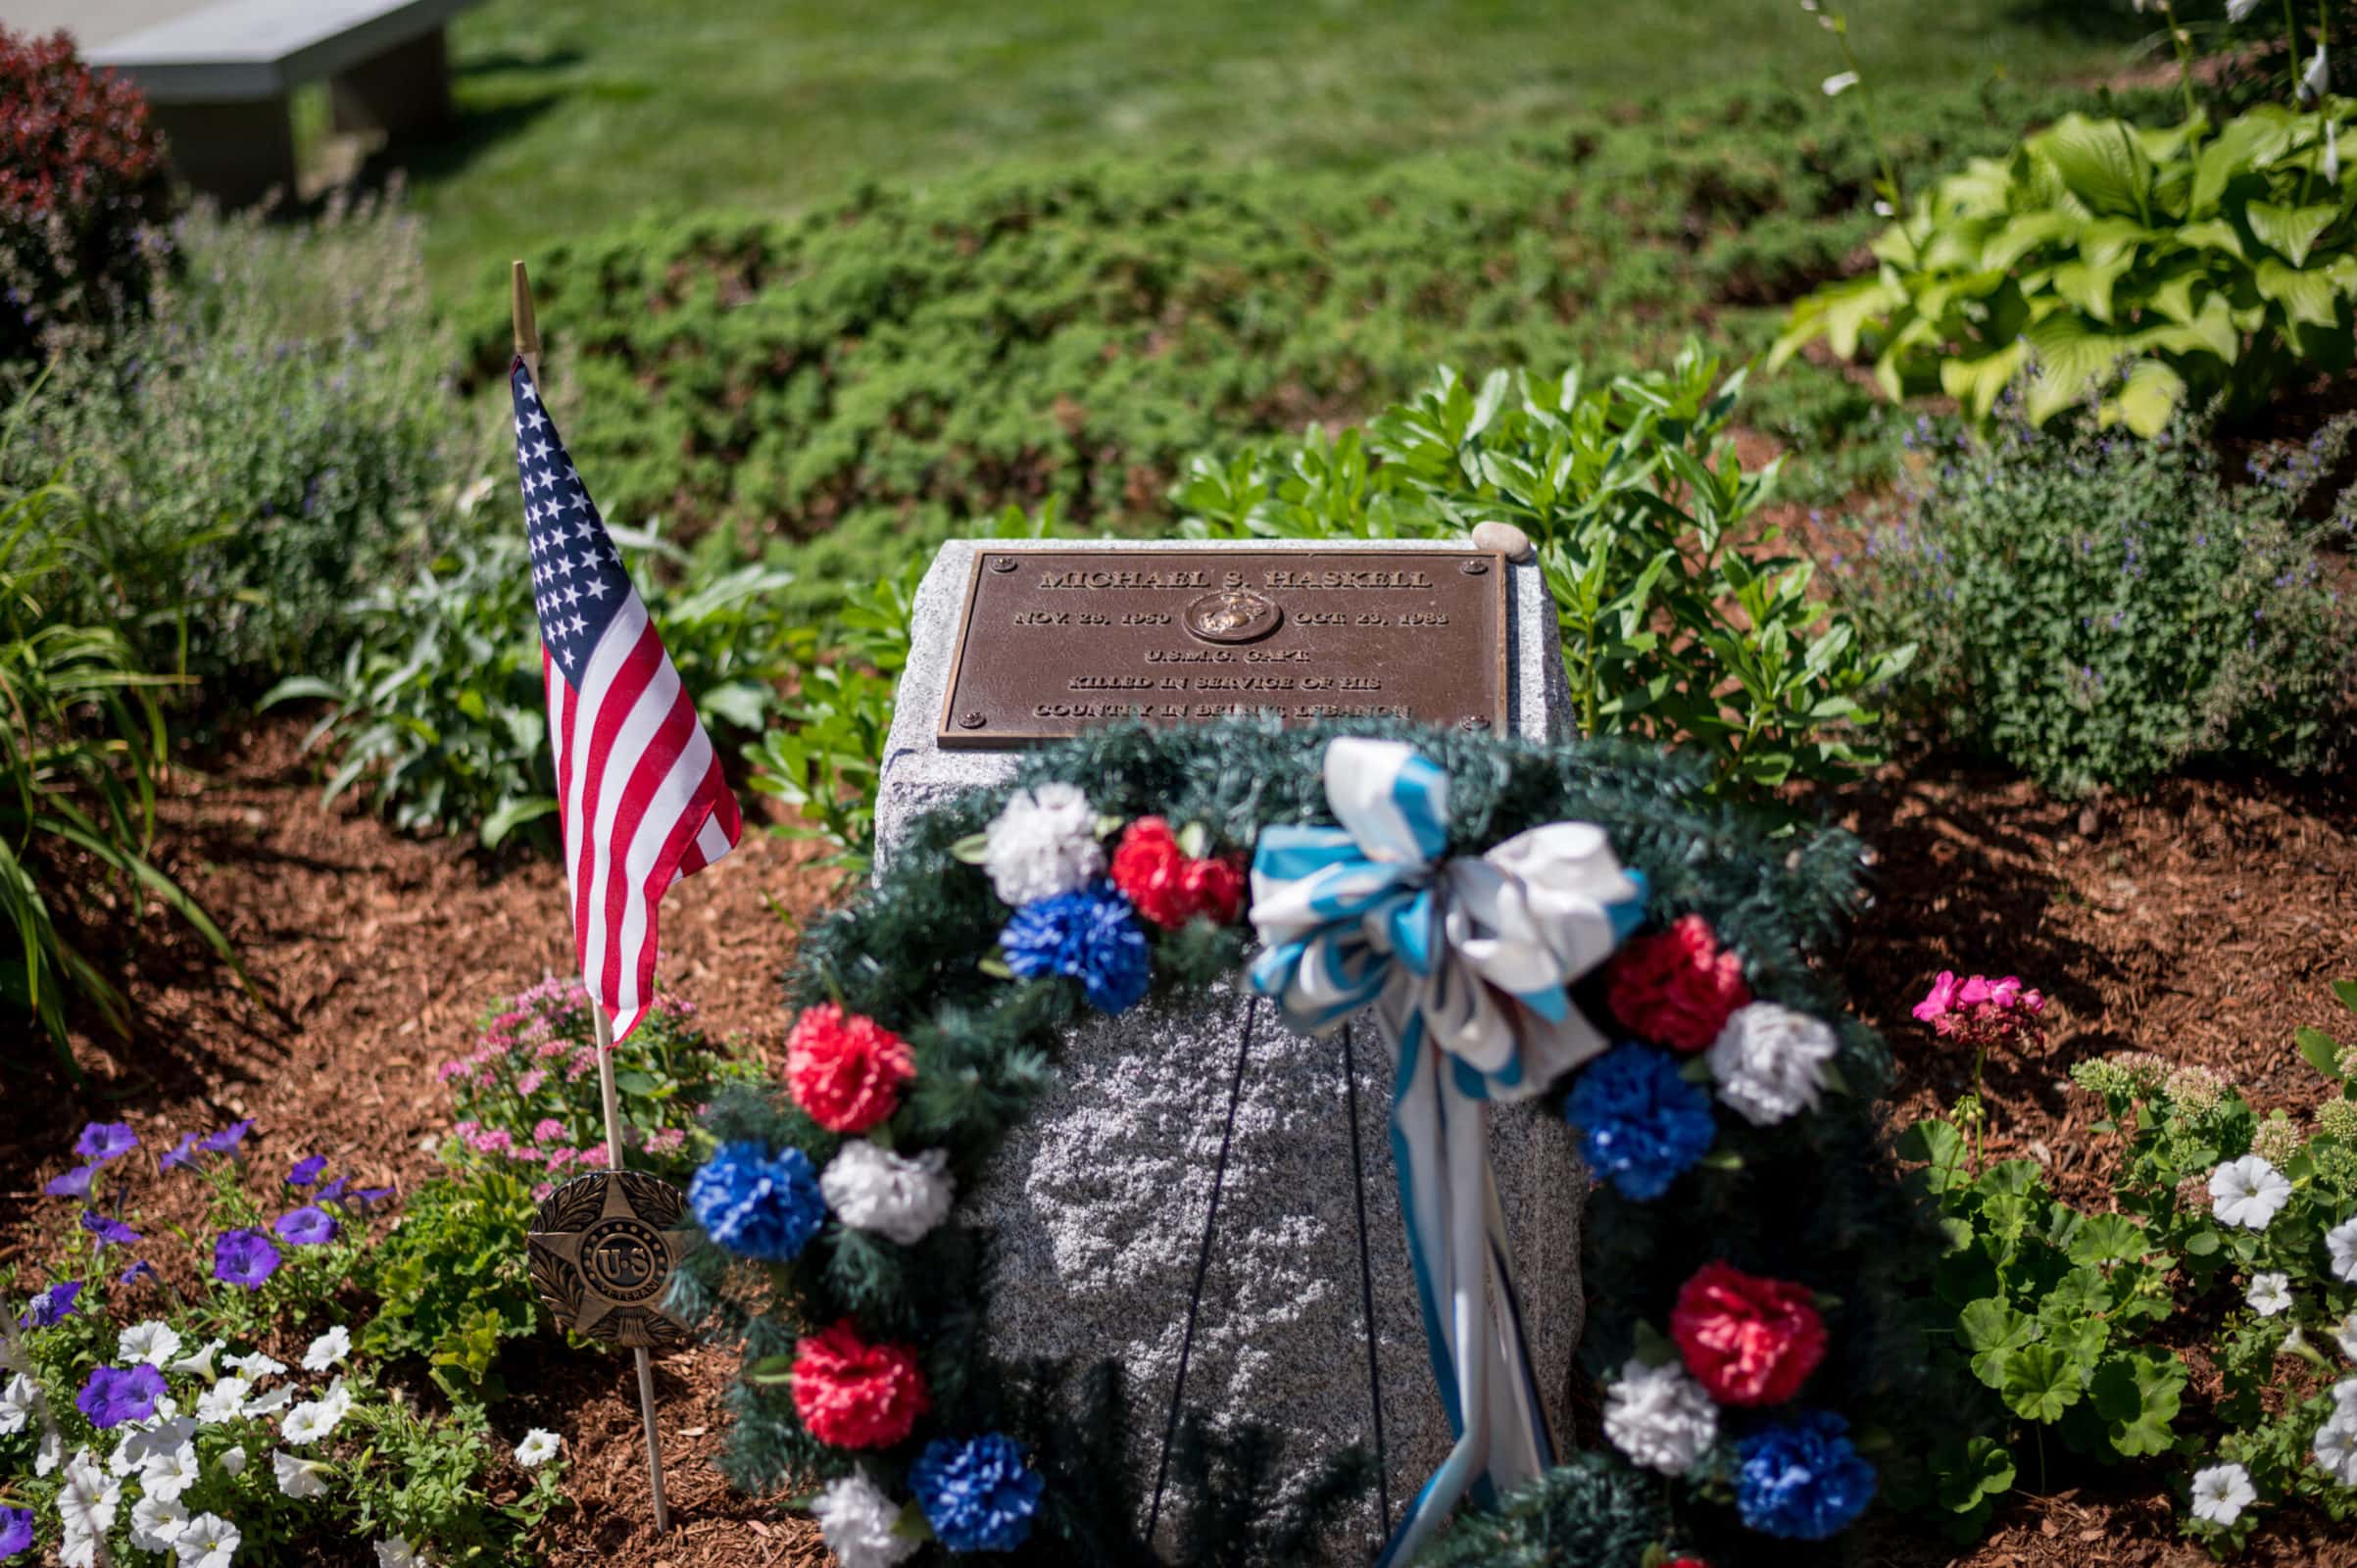 A new plaque sits atop a raised stone pedestal and honors Michael Haskell, who was killed in the 1983 bombings in Beirut, Lebanon. (Photo/Jesse Kucewicz)